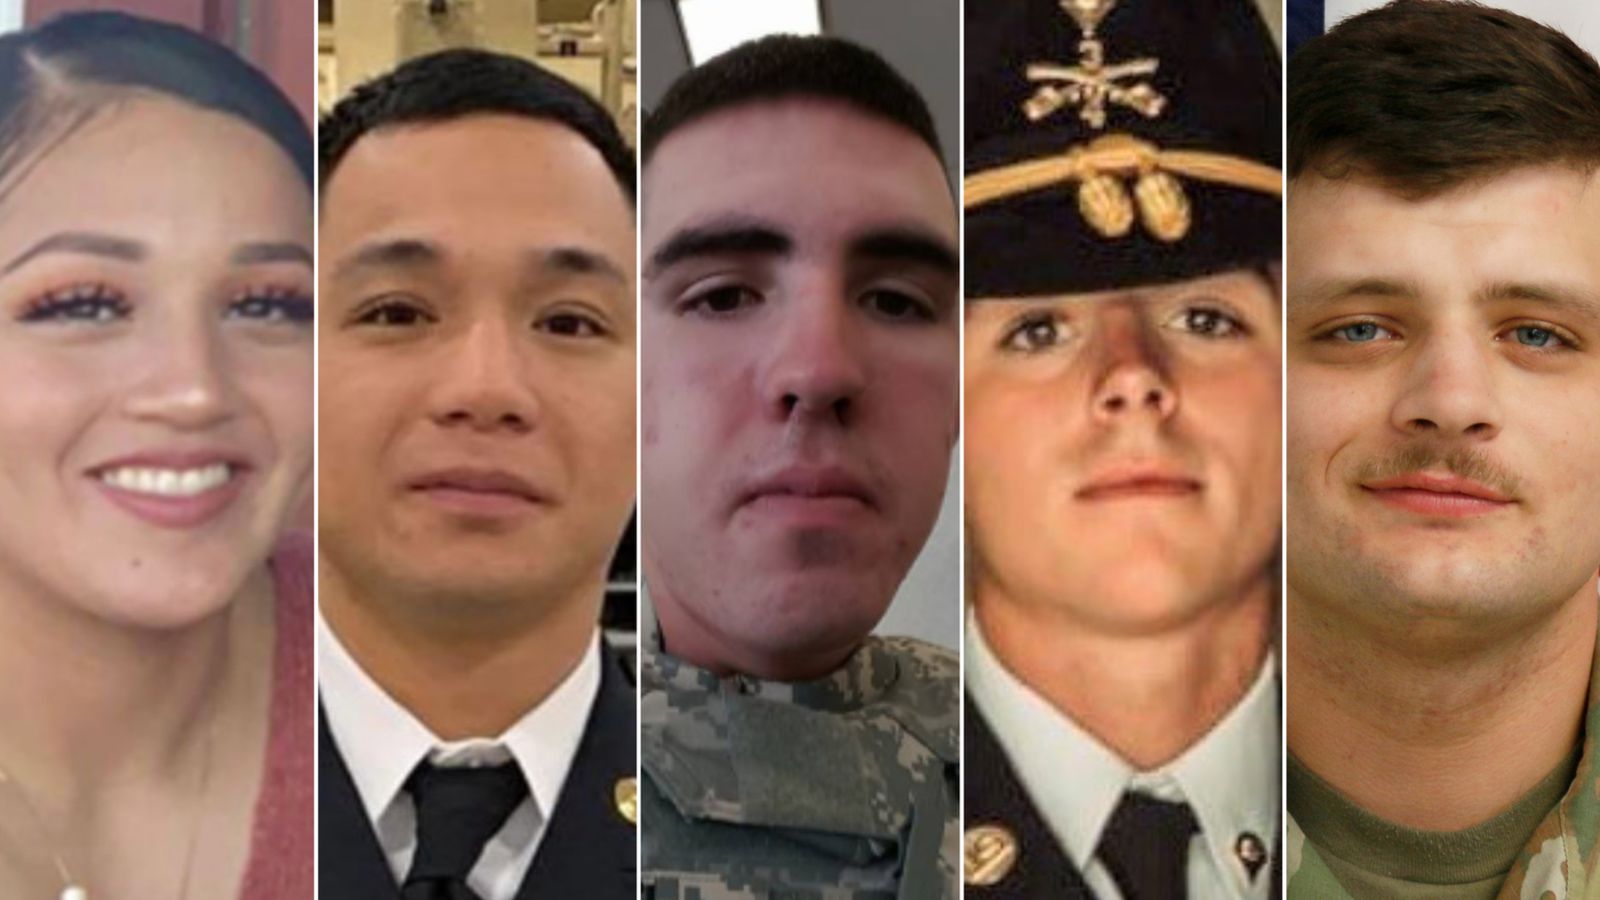 Here's what we know about 8 of the soldiers who died this year at Fort Hood